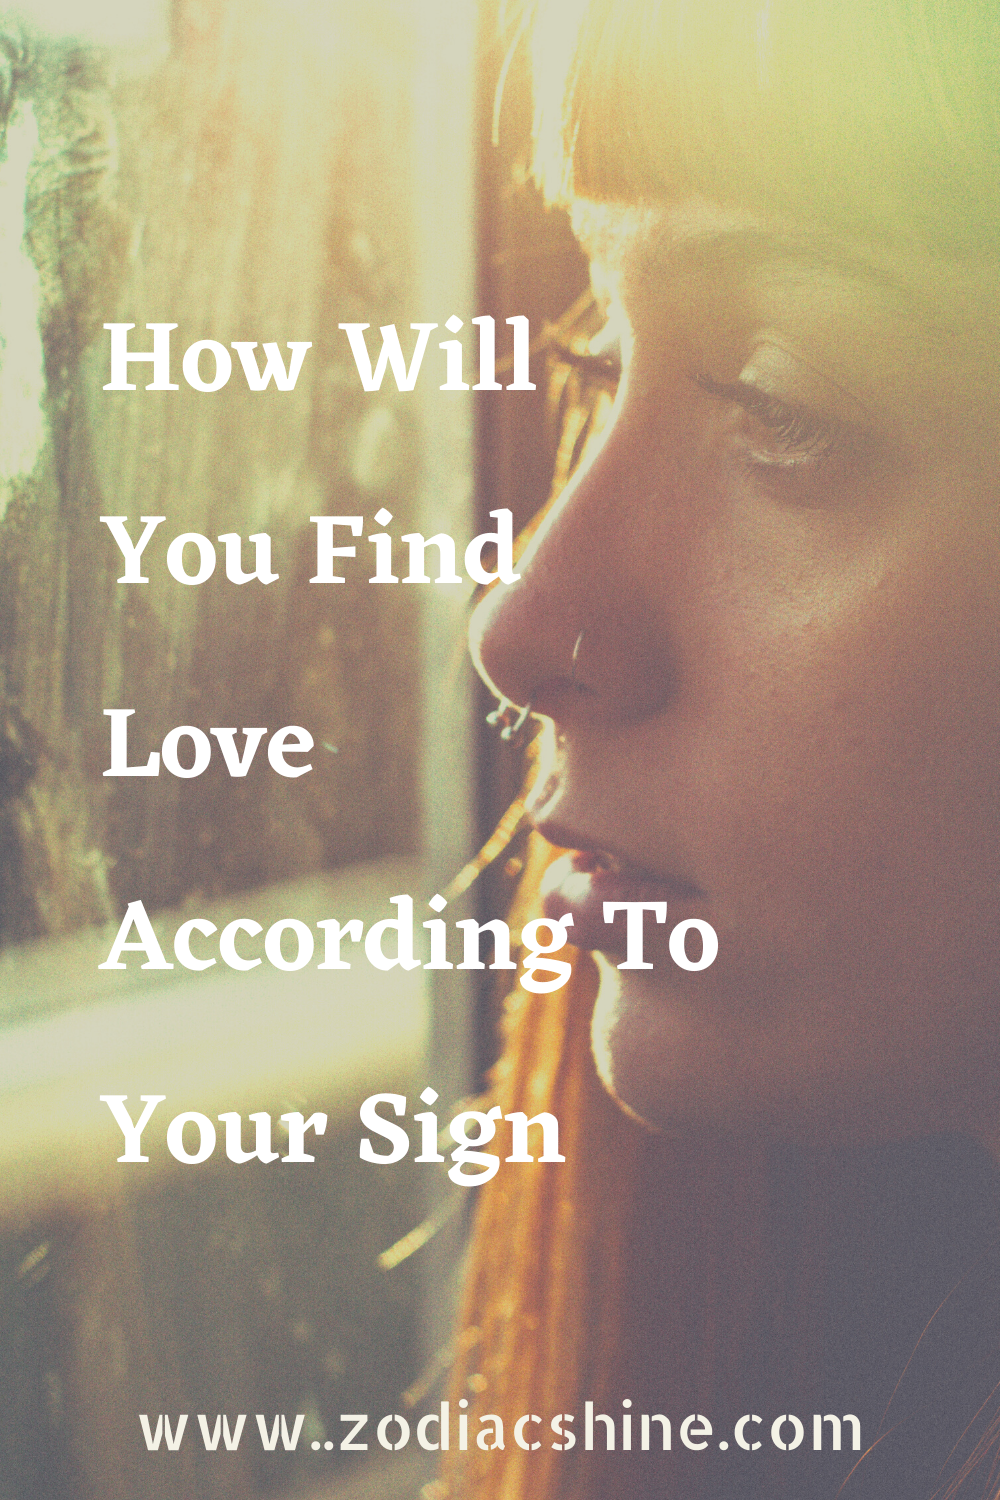 How Will You Find Love According To Your Sign